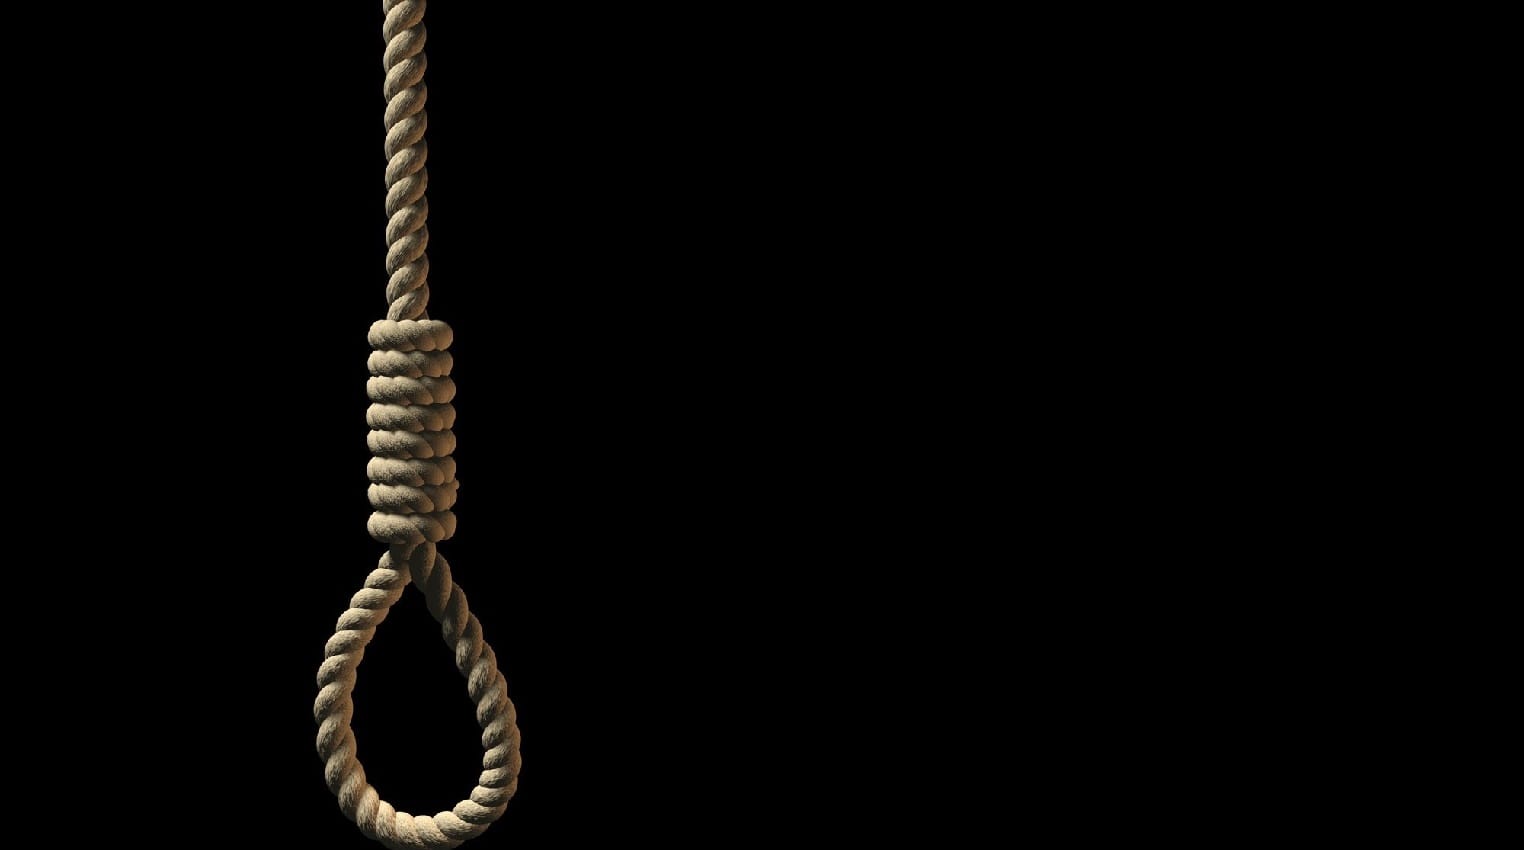 Death penalty essay for